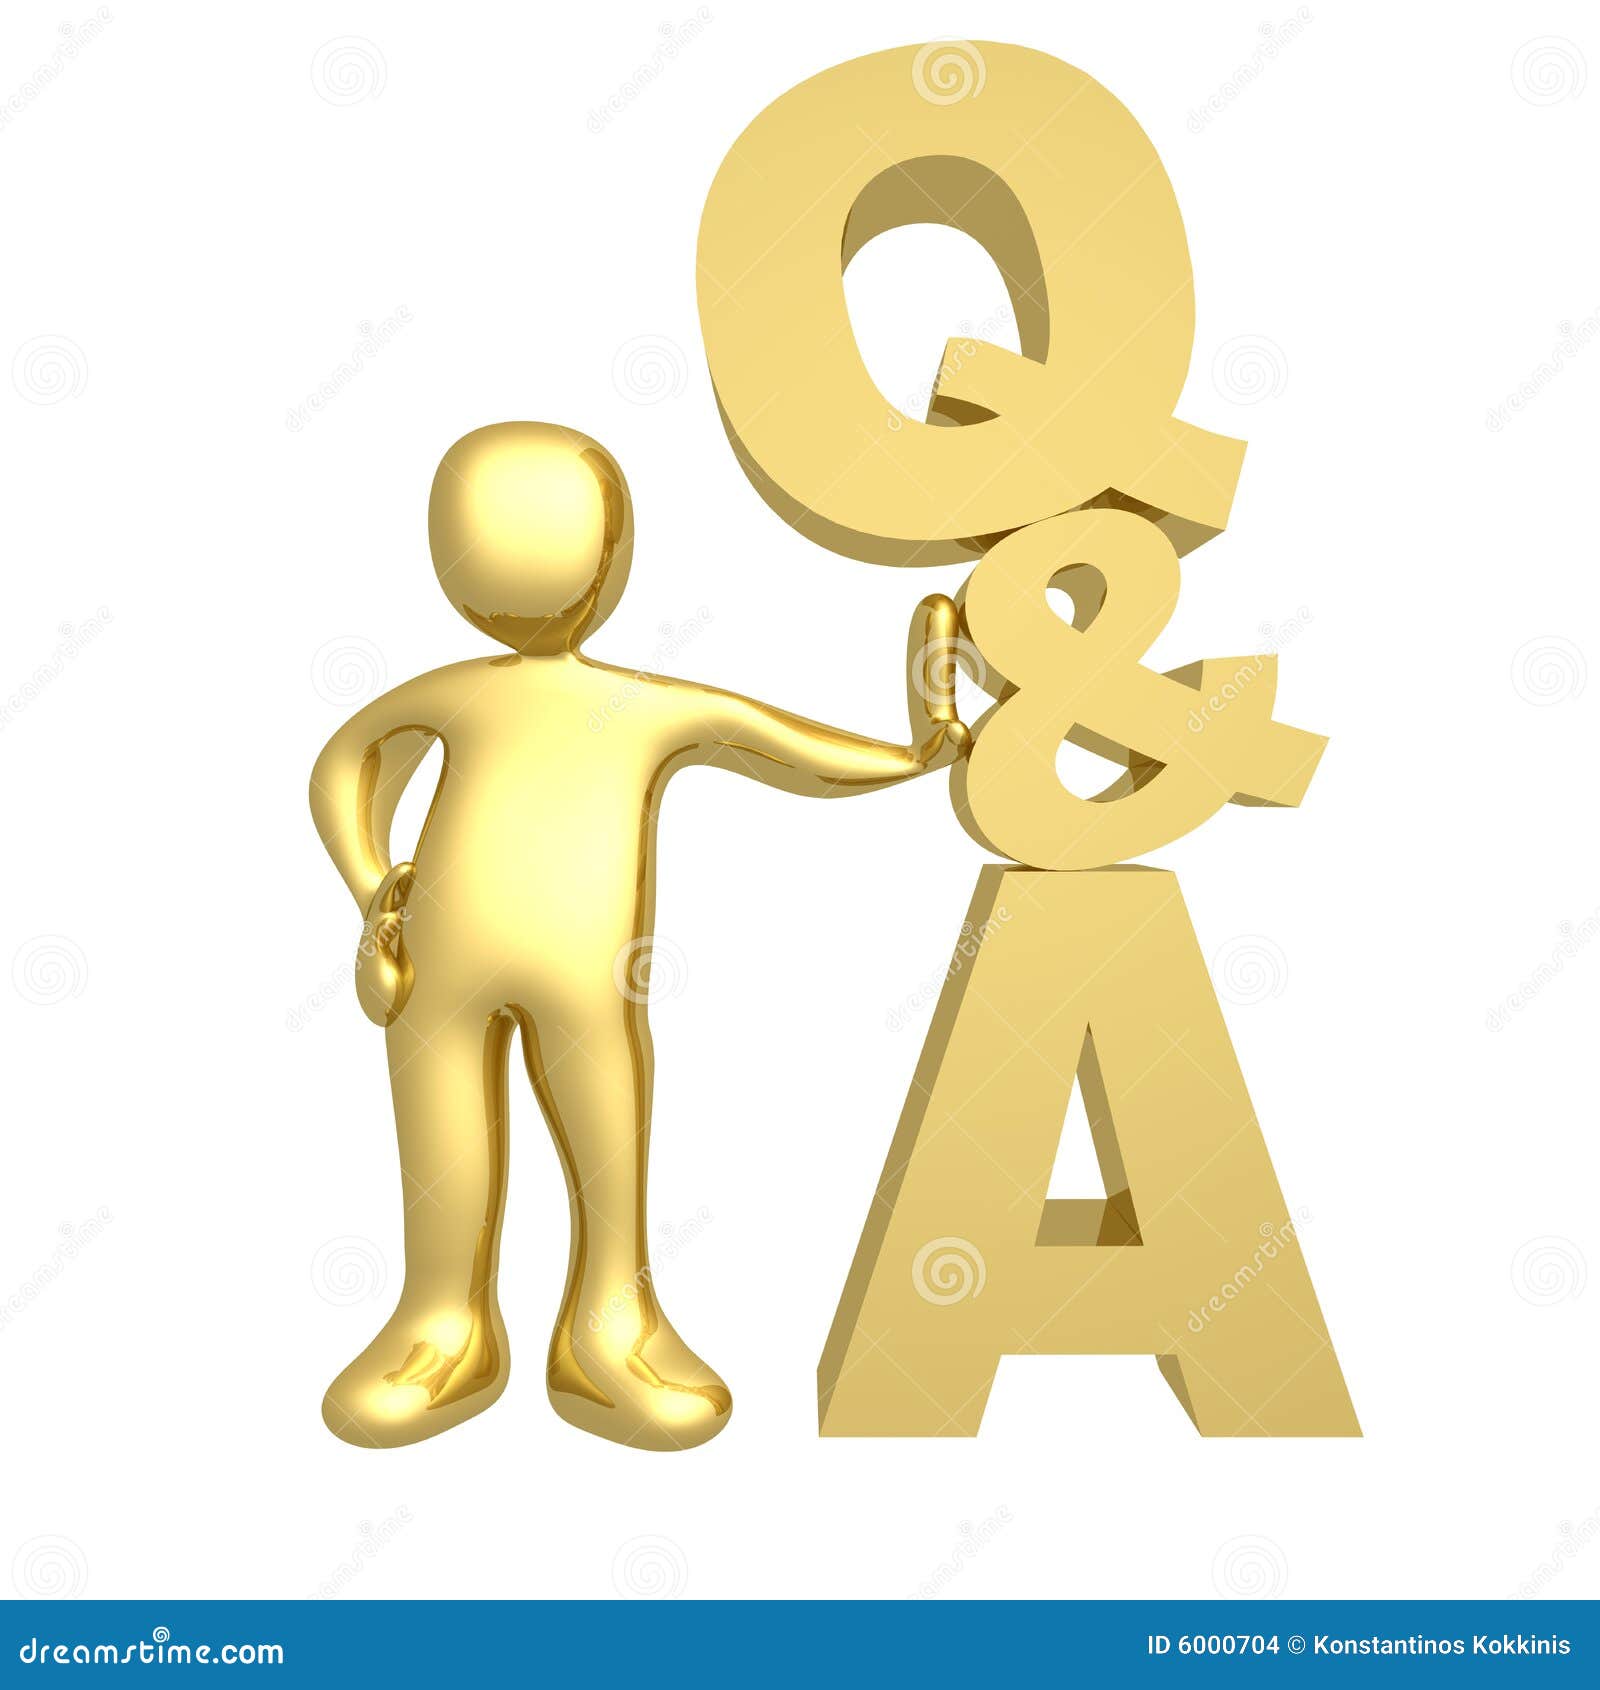 questions and answers clipart - photo #12